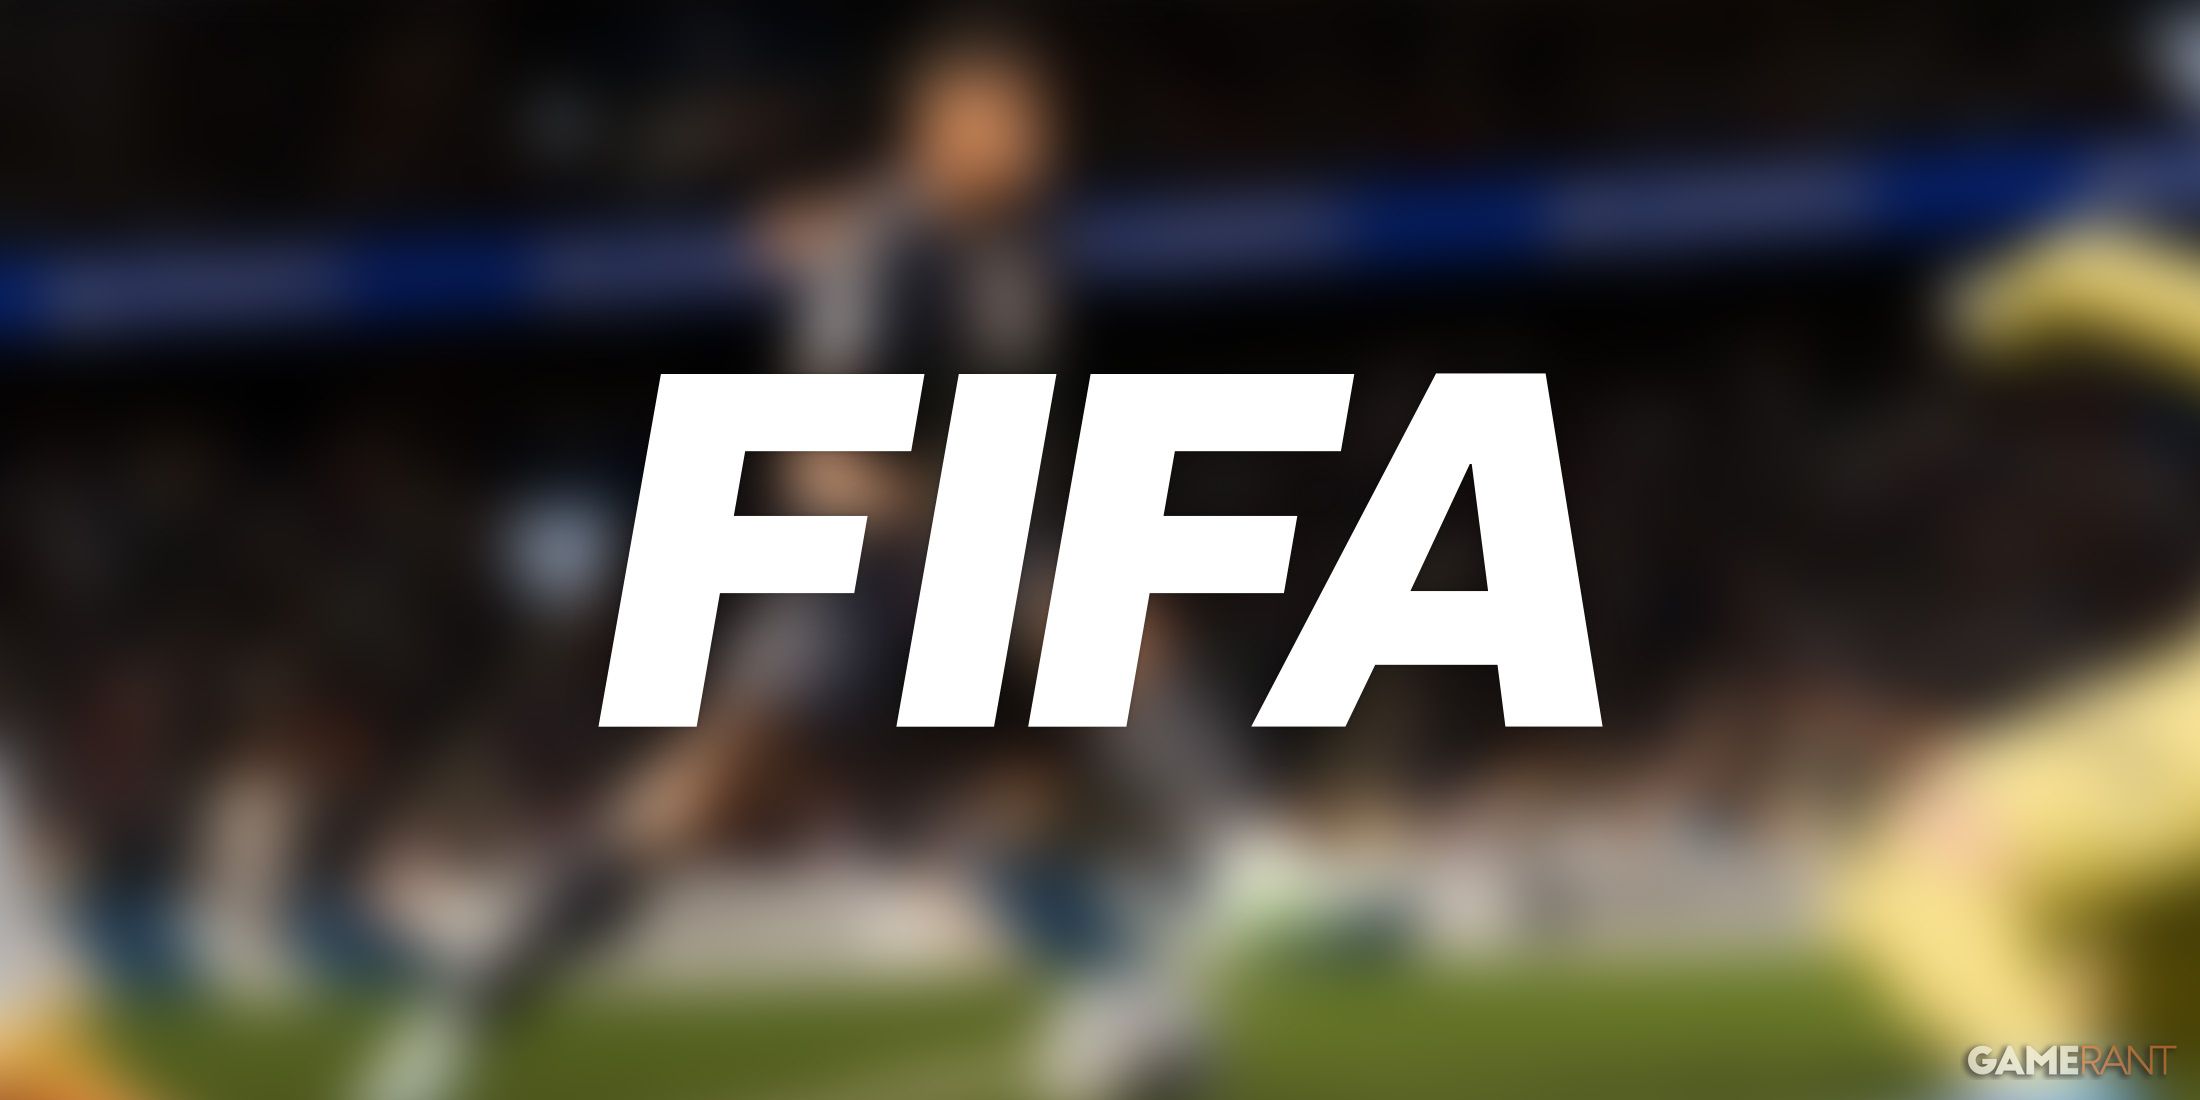 rumor-new-fifa-game-could-be-on-the-way-not-from-ea-game-rant